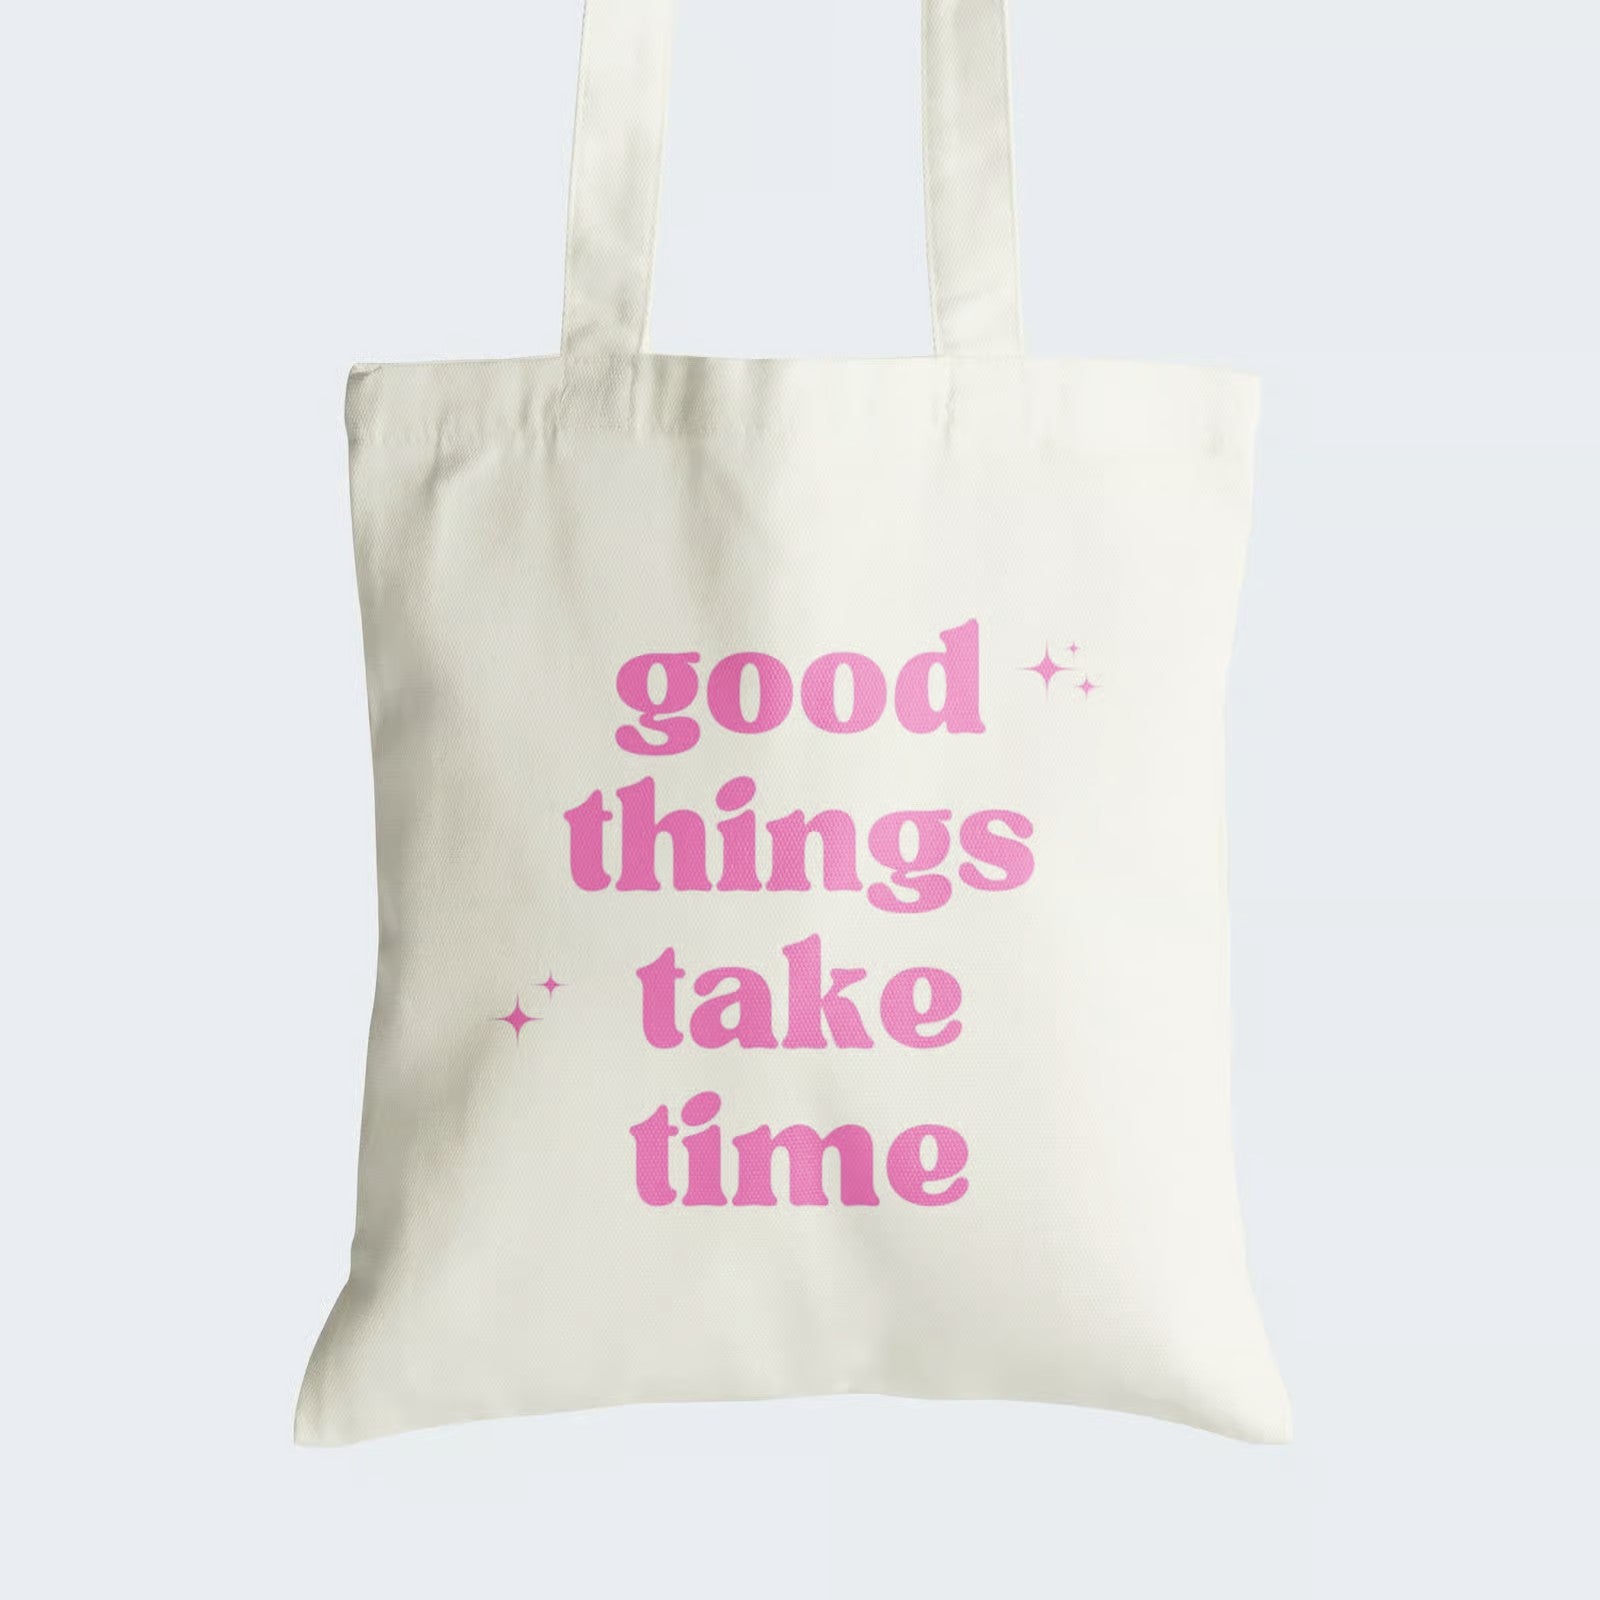 Elevate your style and patience with our Cotton Canvas Tote Bag. Boldly featuring the graphic text "Good Things Take Time" in vibrant pink, this tote is a fashionable reminder of life's wisdom. Crafted for both durability and style, it includes a secure zipper closure for daily convenience. By choosing this reusable tote, you celebrate patience and sustainability in one chic package. Get yours today and carry a touch of wisdom with you!